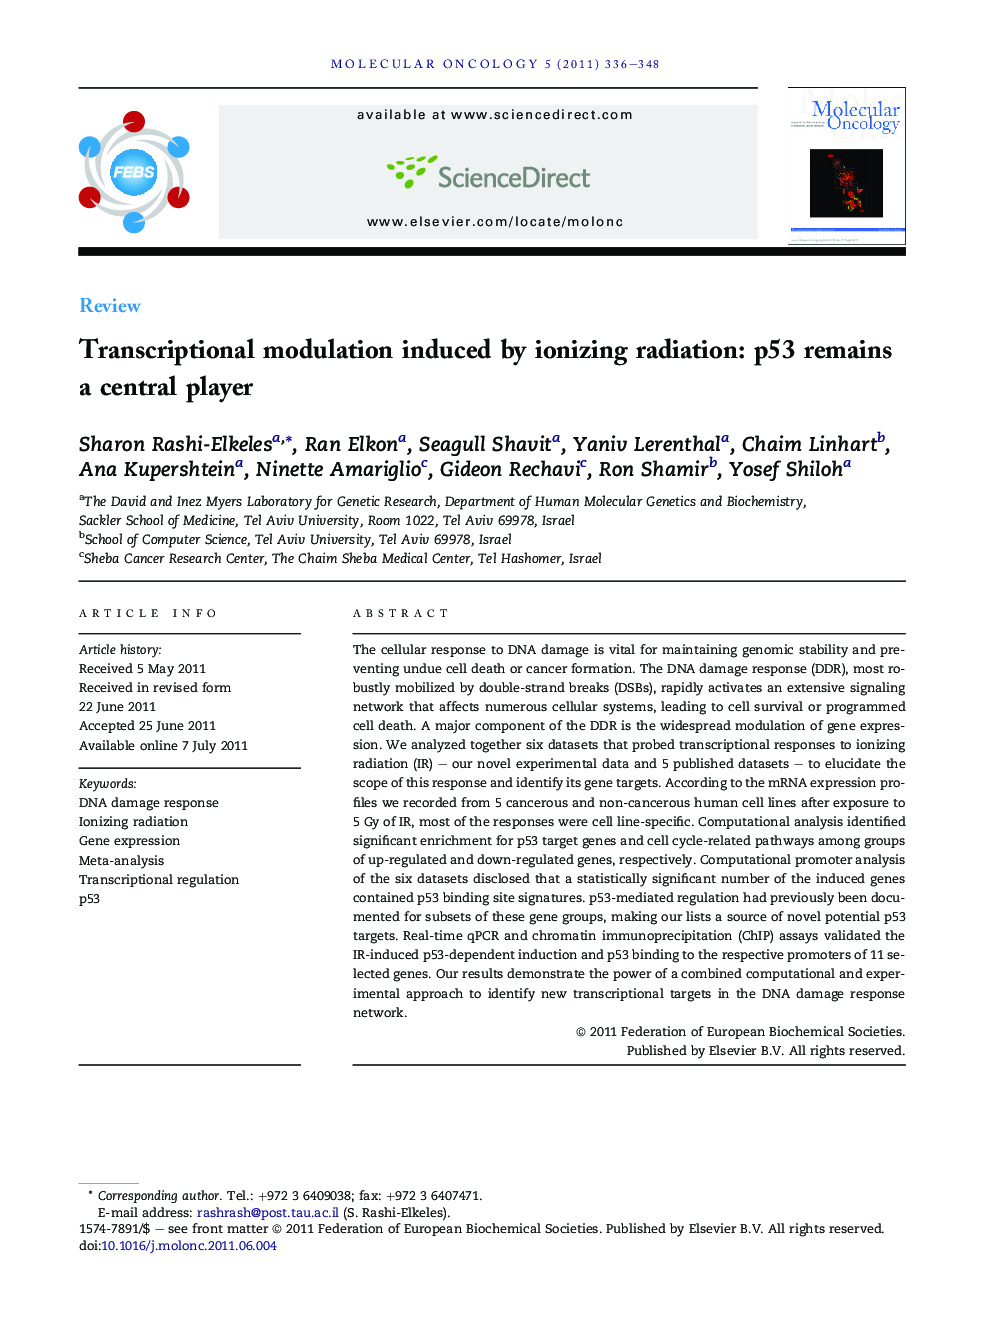 Transcriptional modulation induced by ionizing radiation: p53 remains a central player